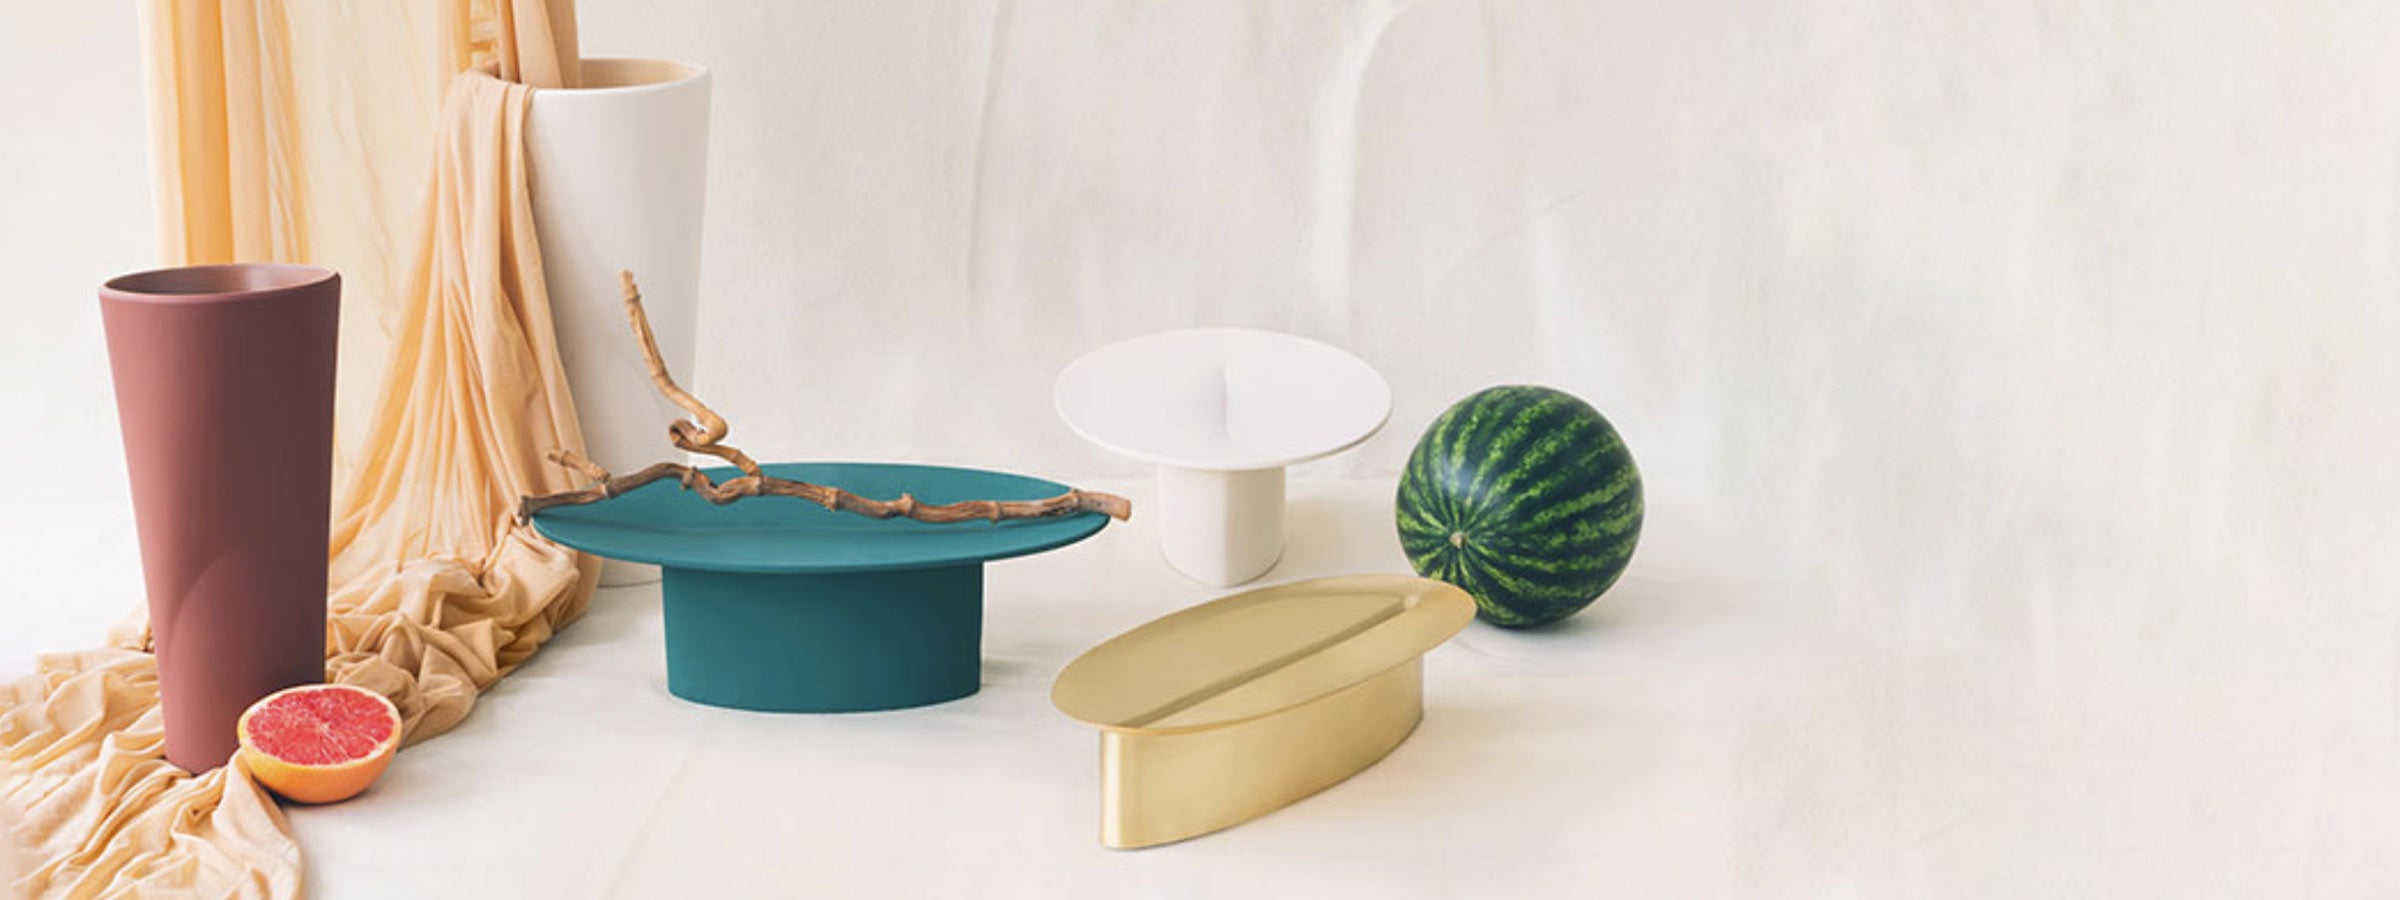 Coquille Collection by Chiara Andreatti for Paola C - Design Italy